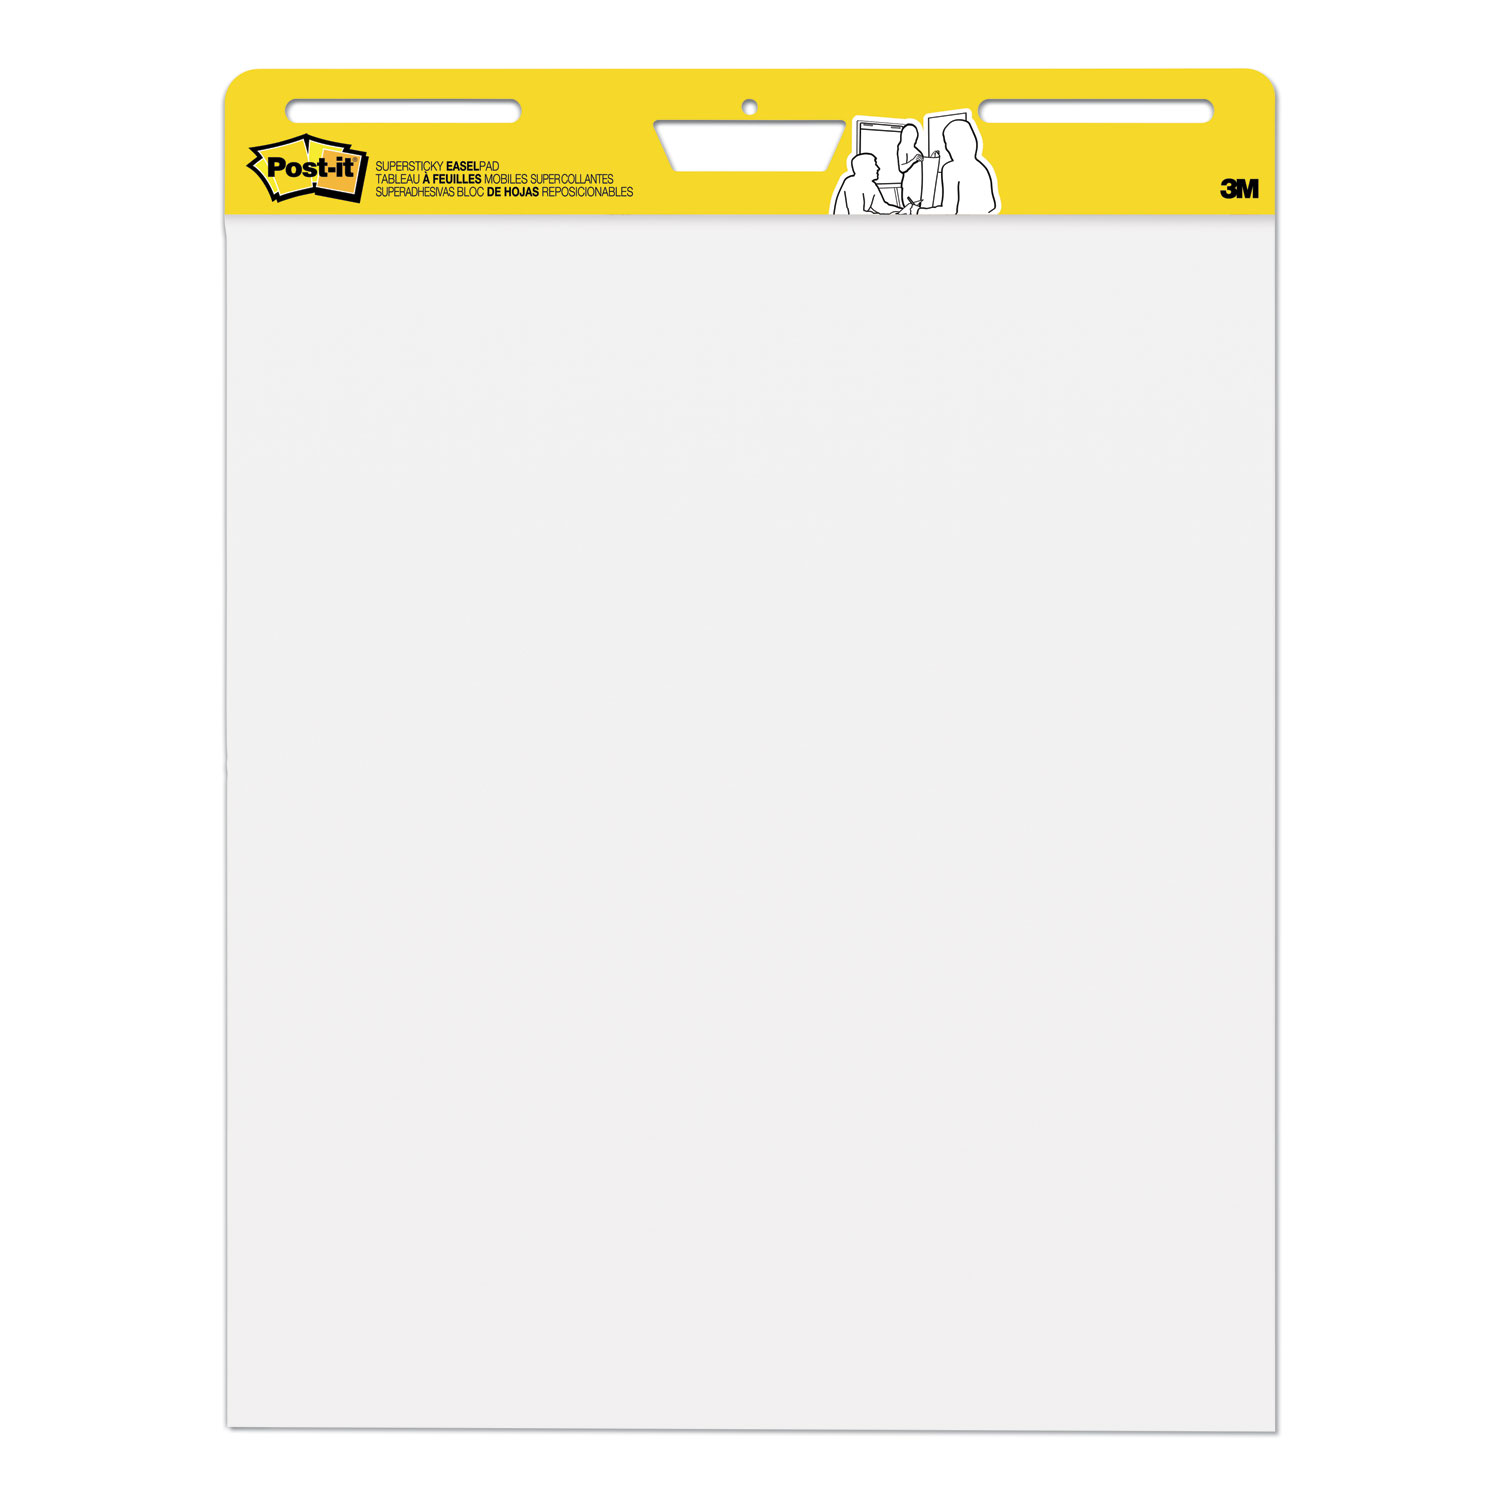  Post-it Easel Pads Super Sticky 559 Self-Stick Easel Pads, 25 x 30, White, 30 Sheets, 2/Carton (MMM559) 